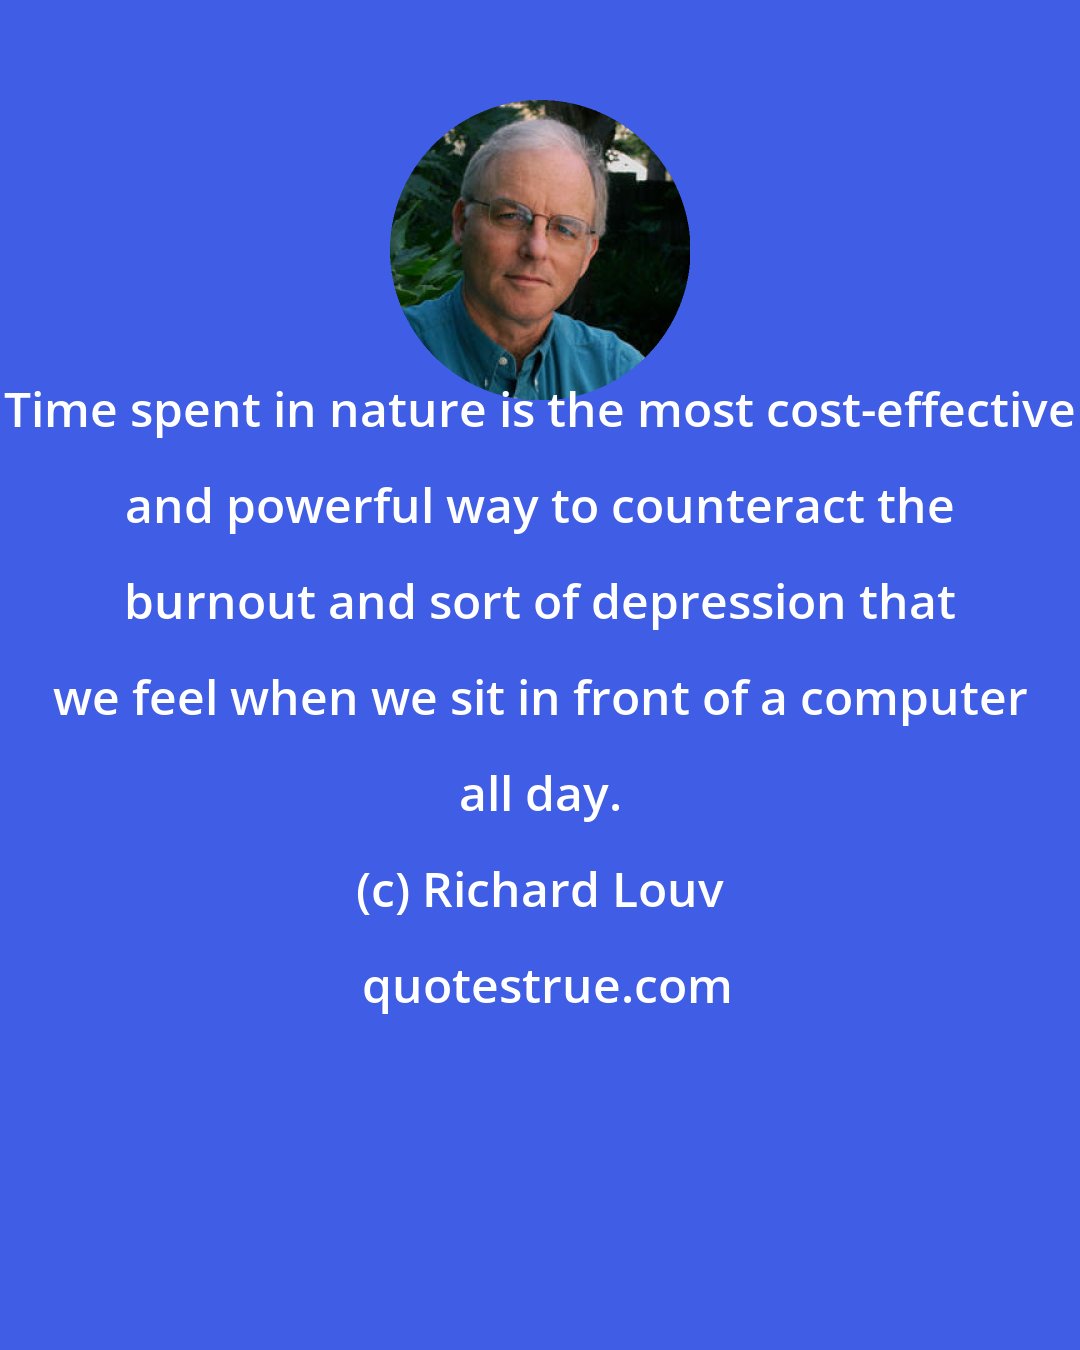 Richard Louv: Time spent in nature is the most cost-effective and powerful way to counteract the burnout and sort of depression that we feel when we sit in front of a computer all day.